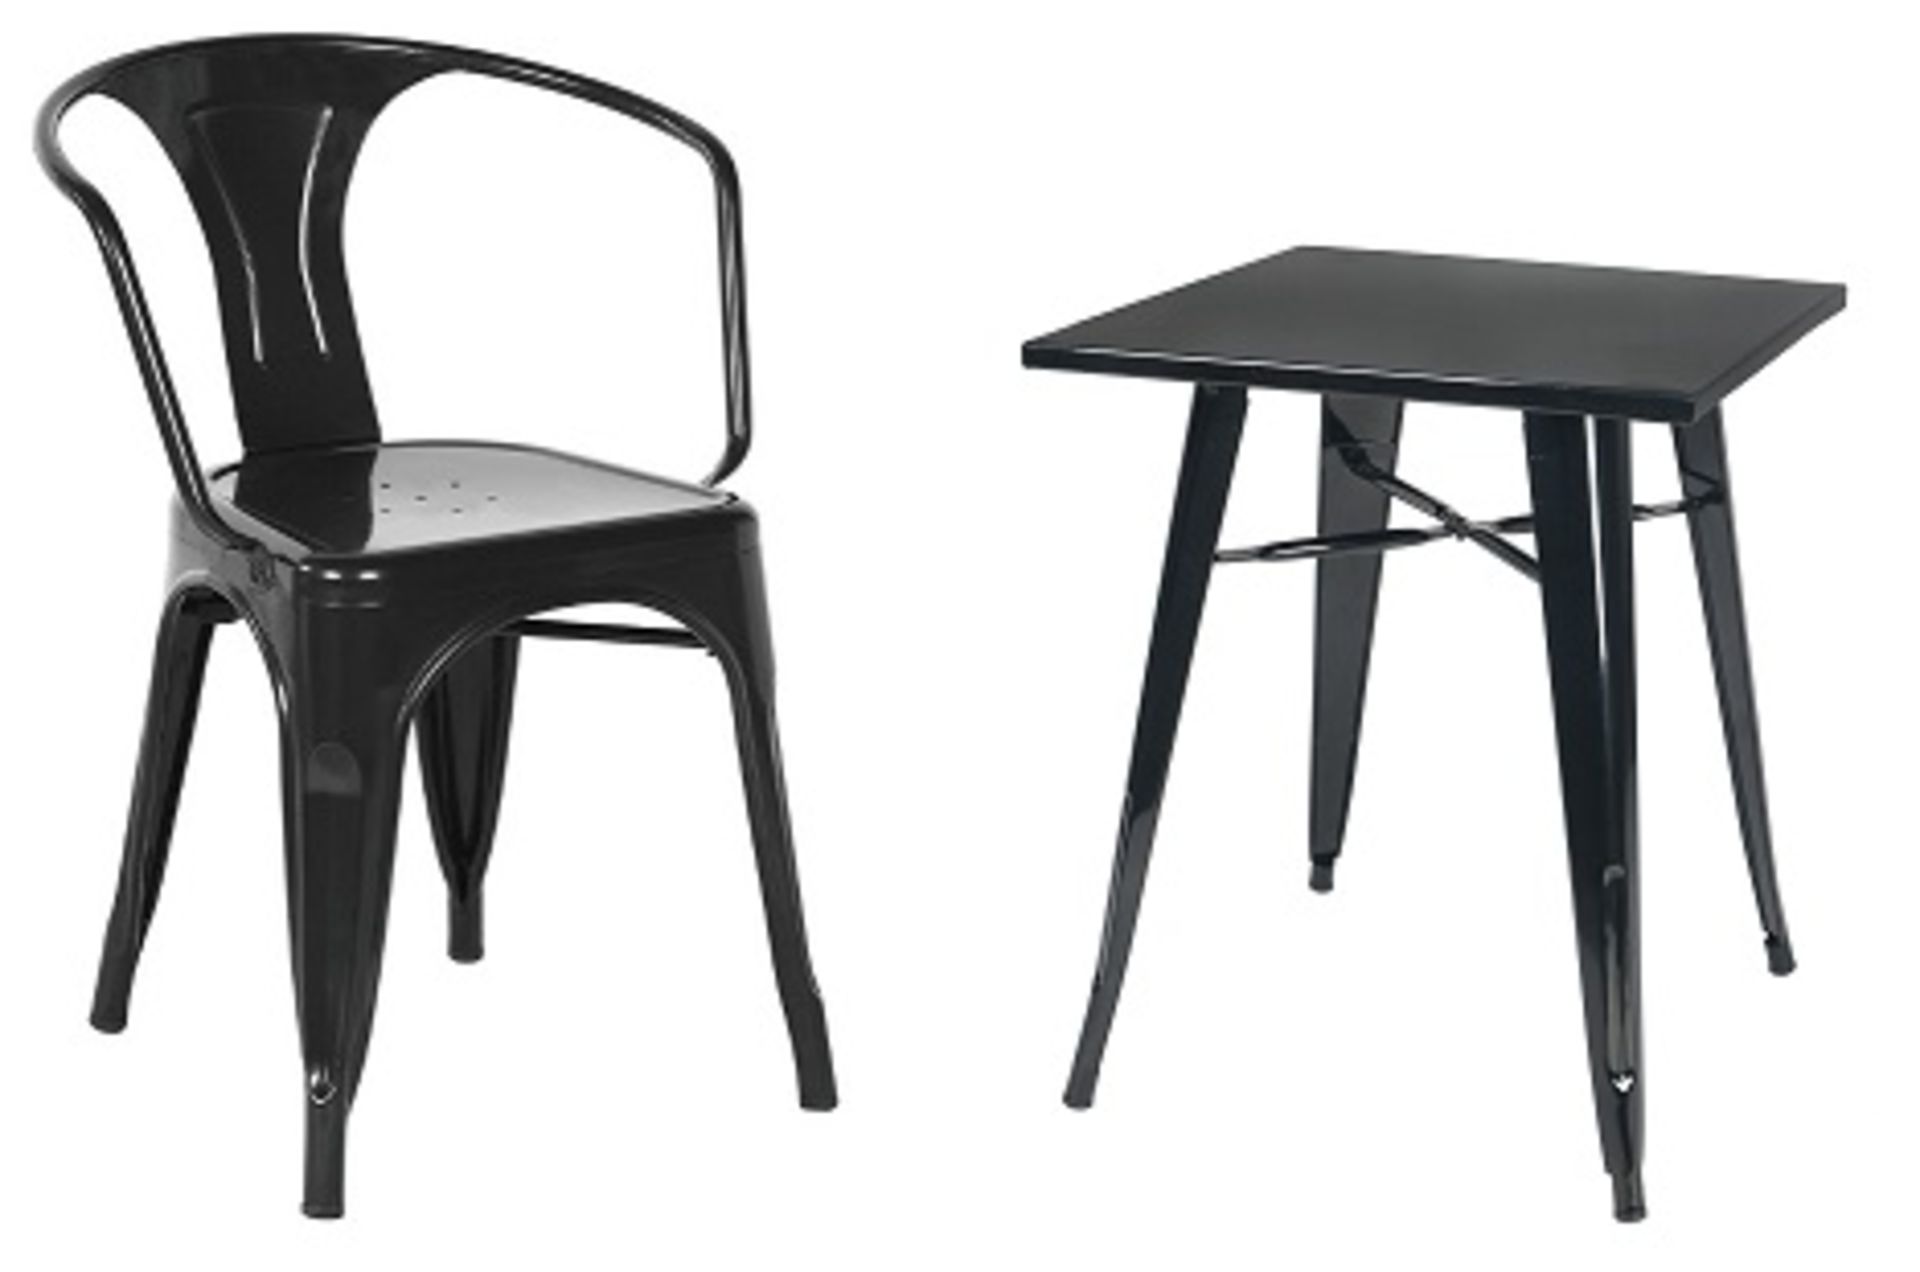 1 x Tolix Industrial Style Outdoor Bistro Table and Chair Set in Black - Includes 1 x Table and 4